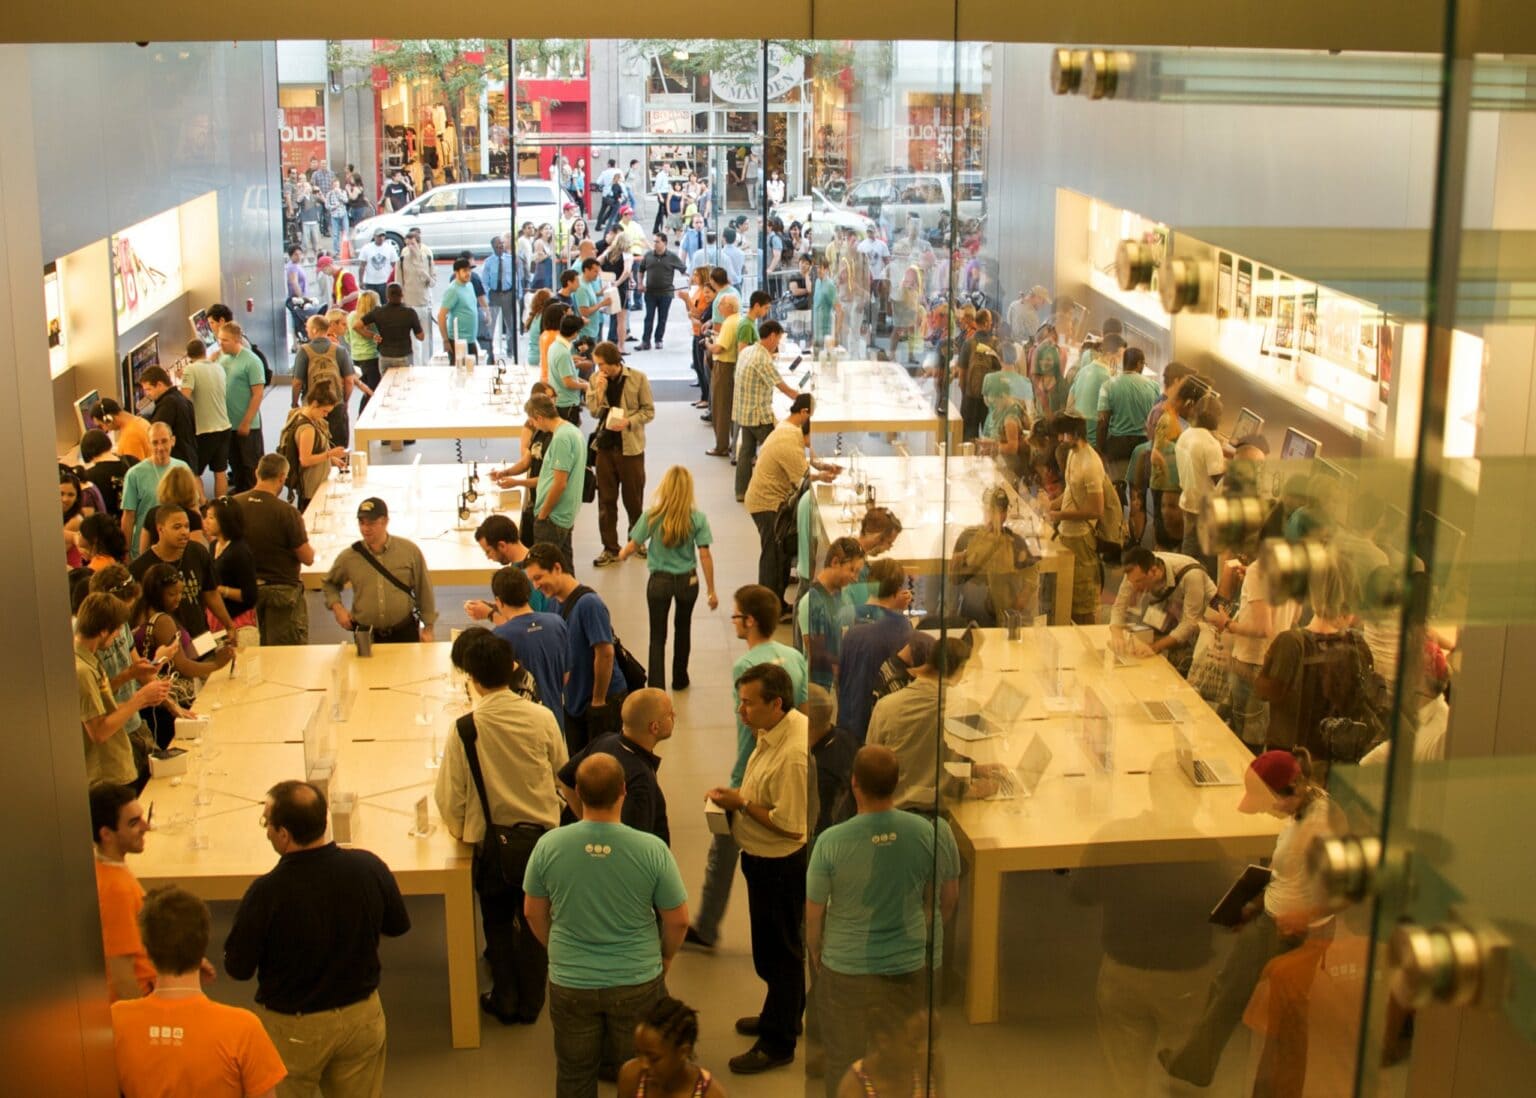 Apple Sainte-Catherine closes due to COVID-19. Here's the store during happier, less socially distanced times.